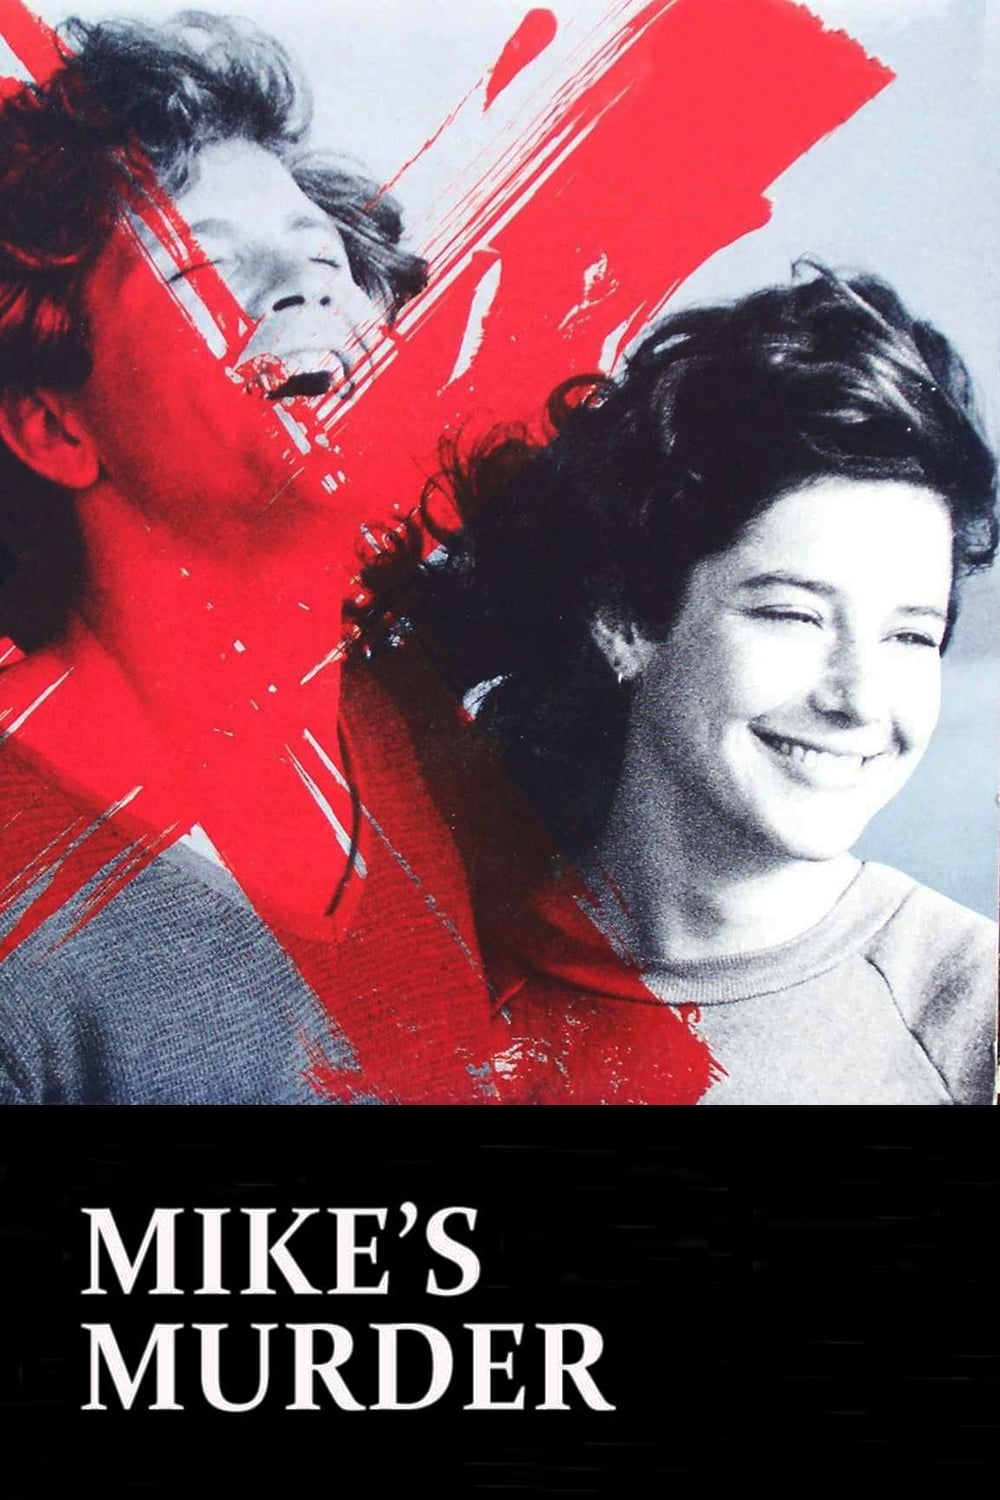 Mike's Murder (1984)